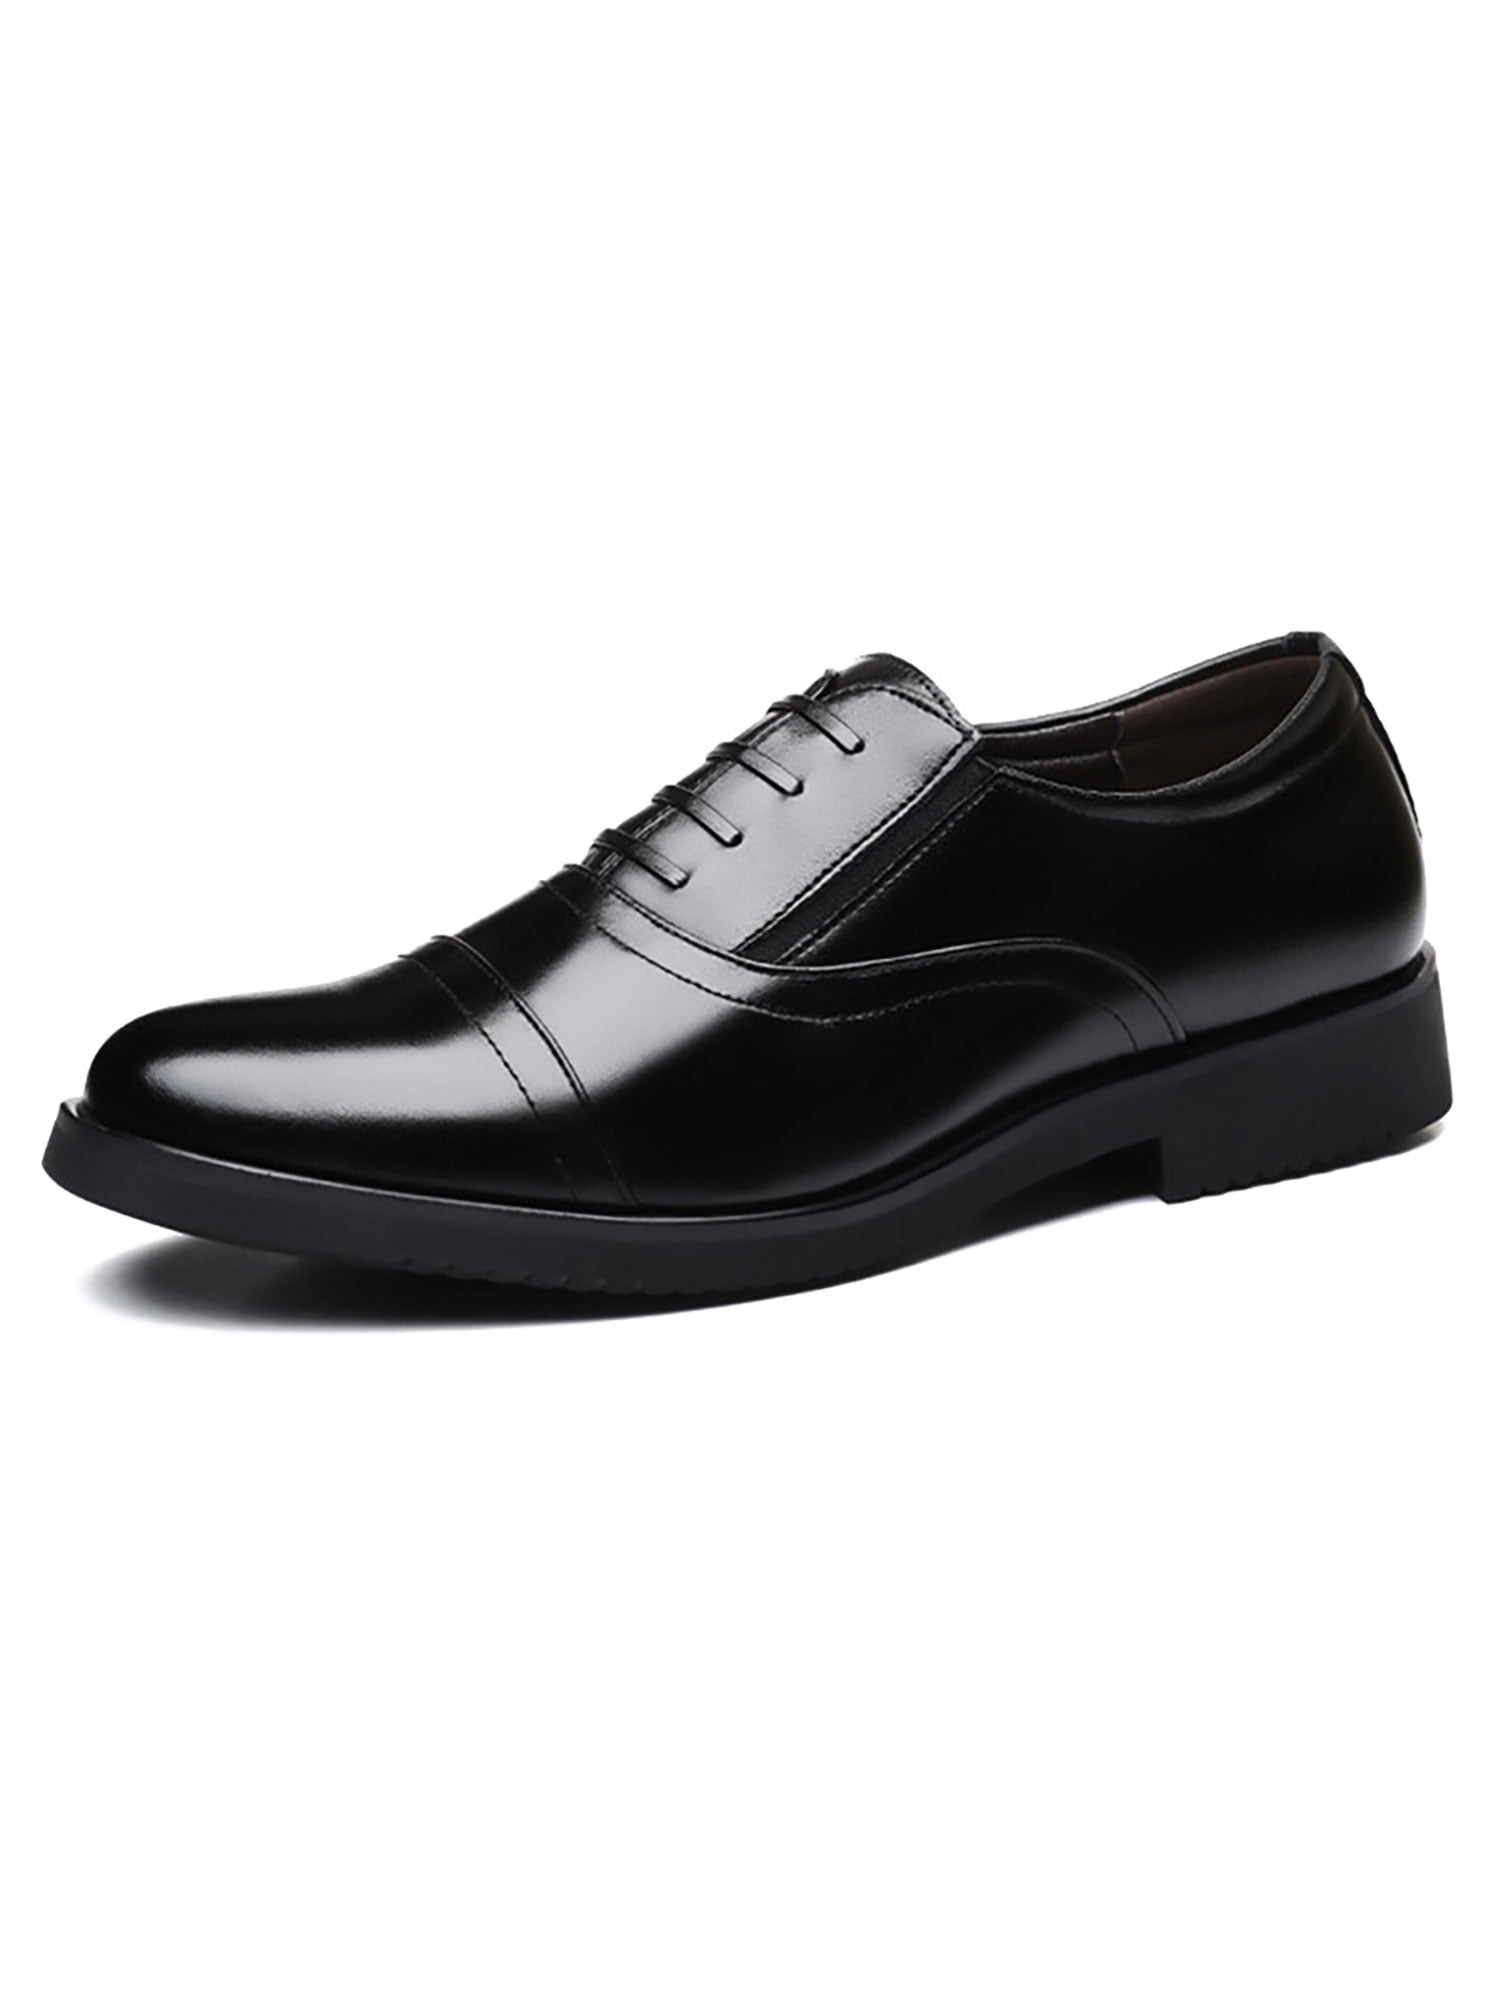 Men's Formal Shoes Slip on Flats Business Dress Shoes Patent Leather  Footwear